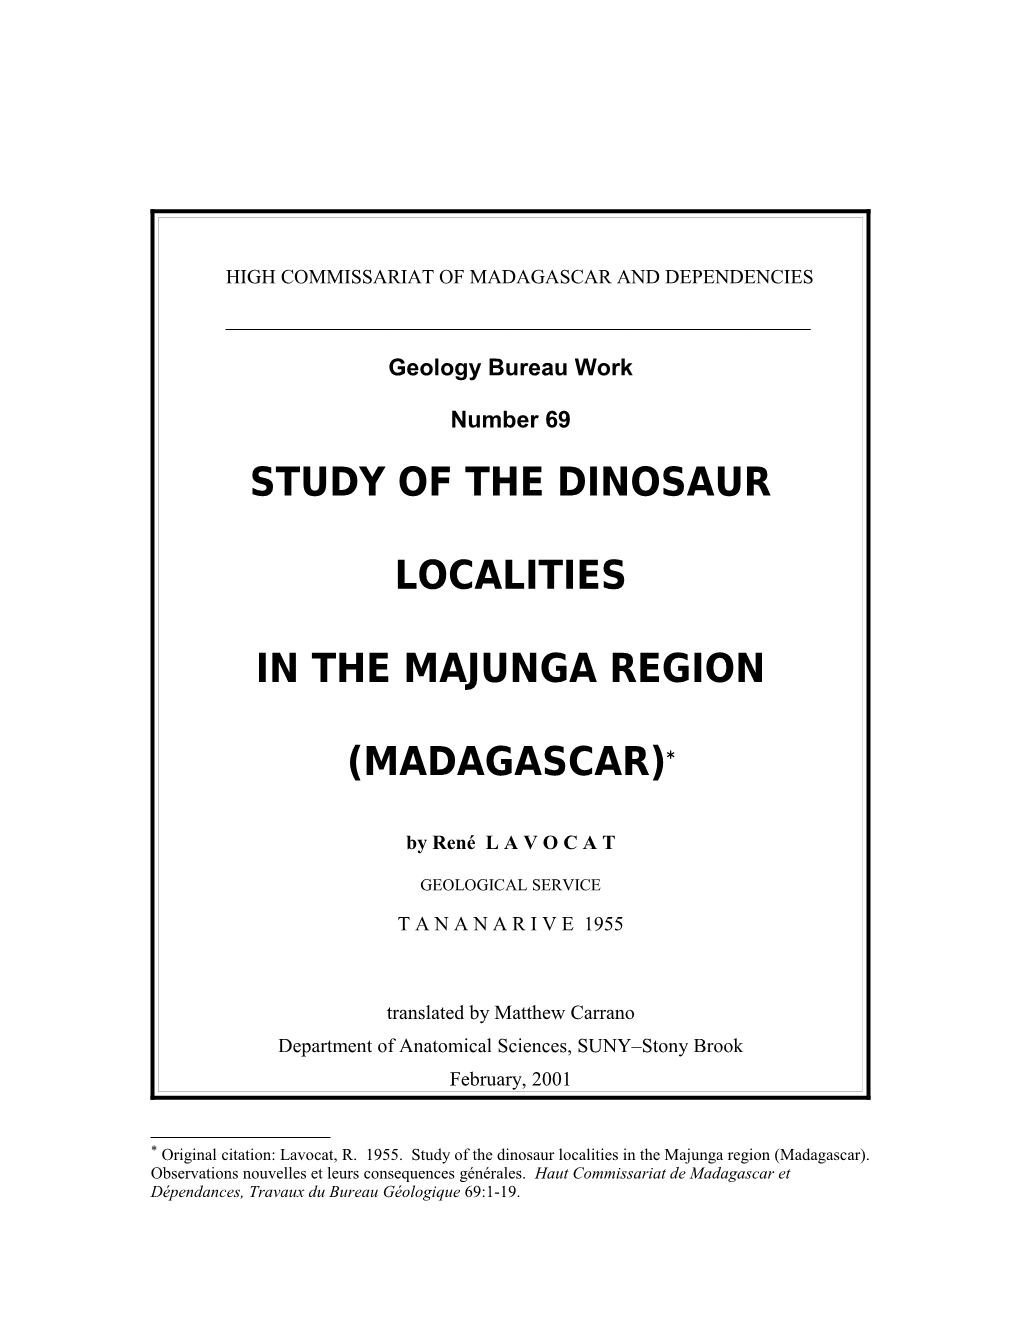 High Commissariat of Madagascar and Dependencies